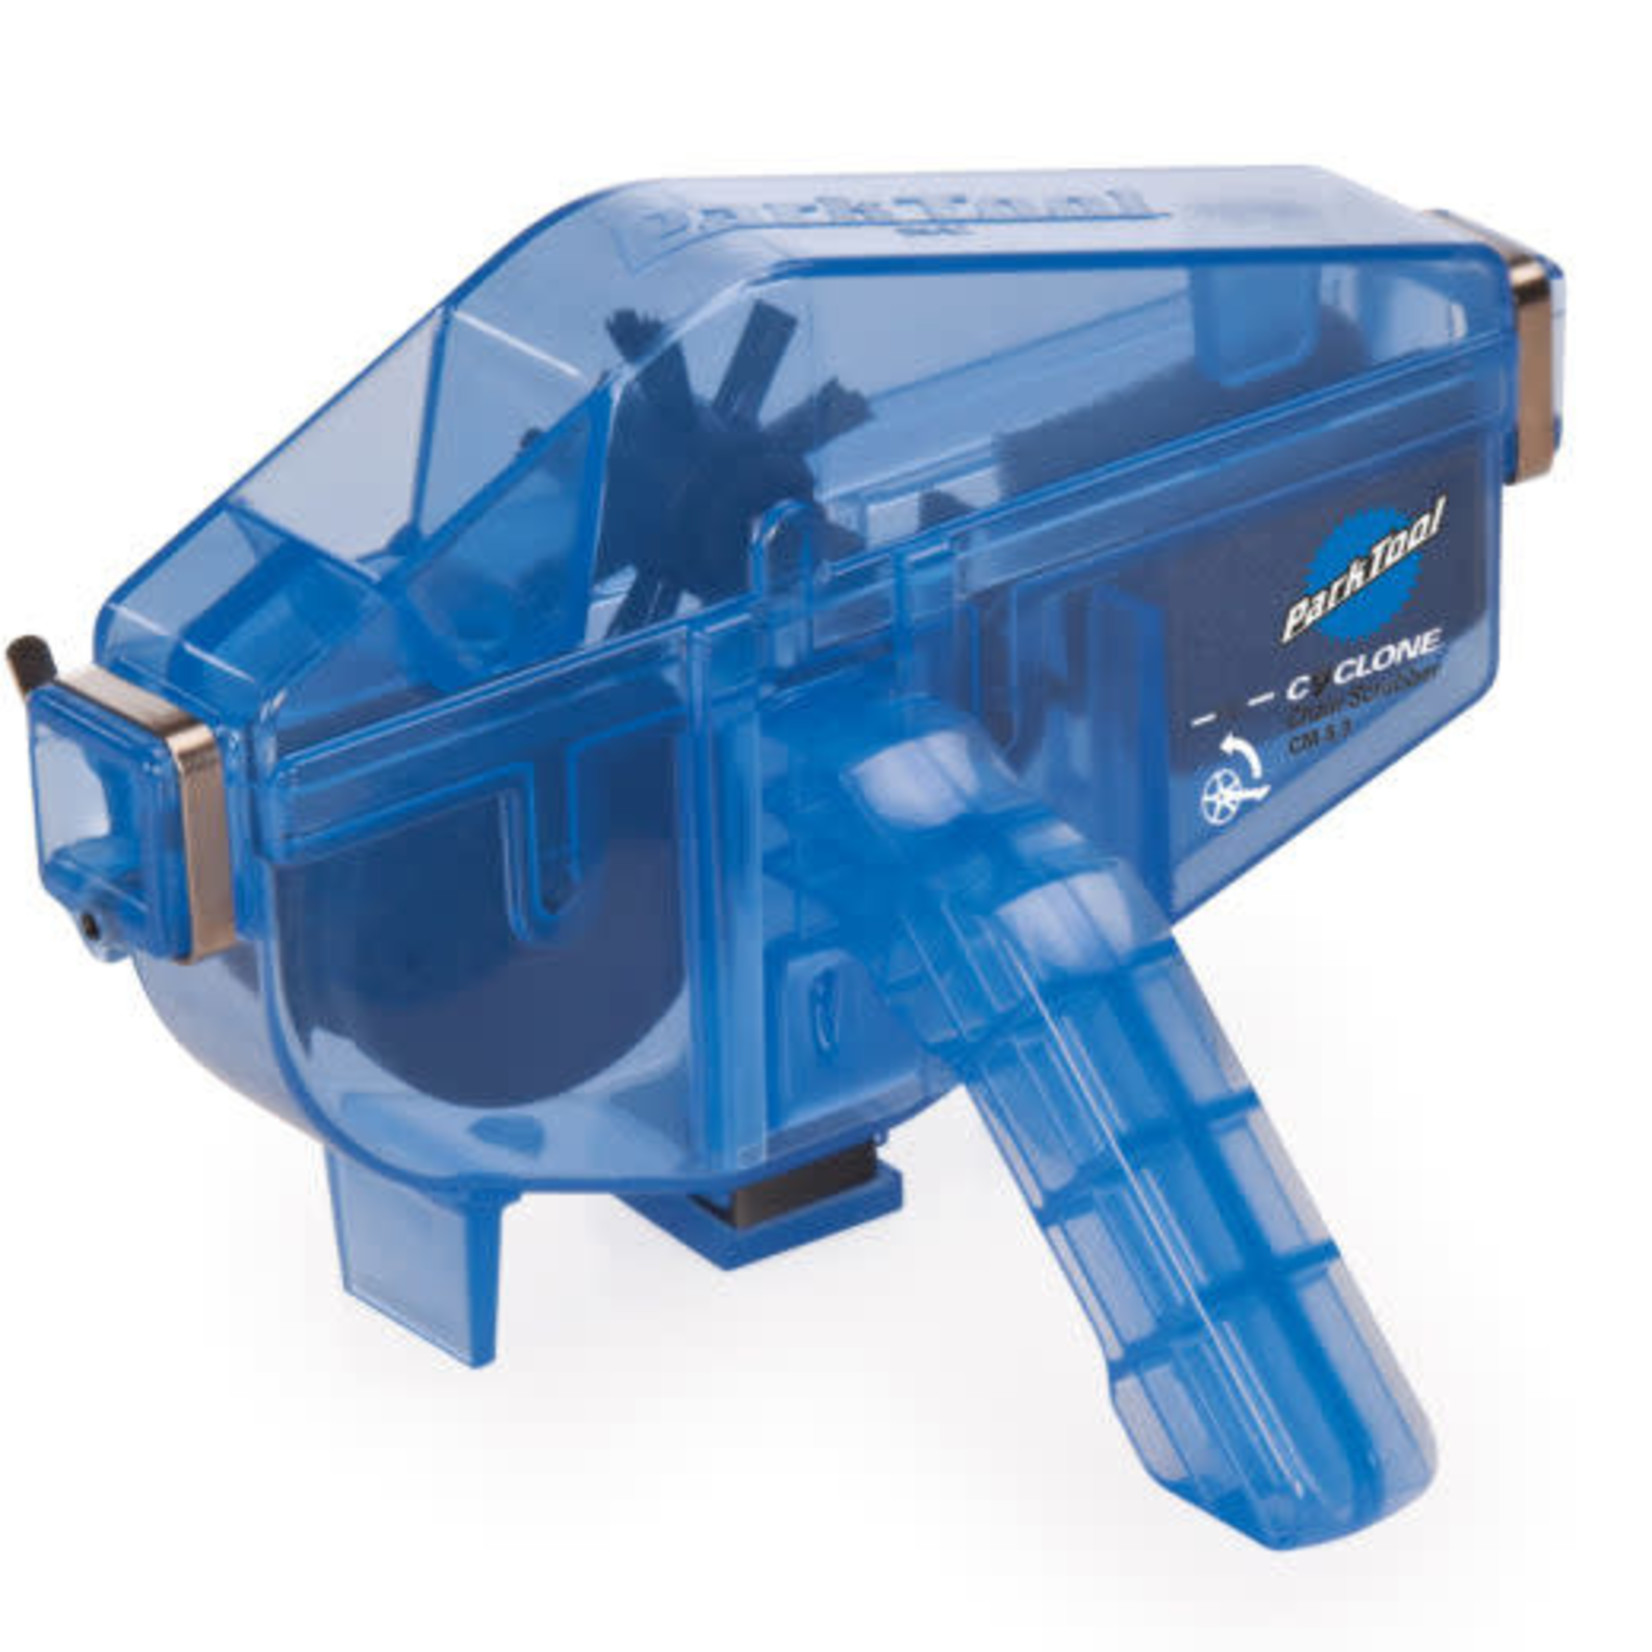 Park Tool Park Tool, CM-5.3 Cyclone Chain Scrubber